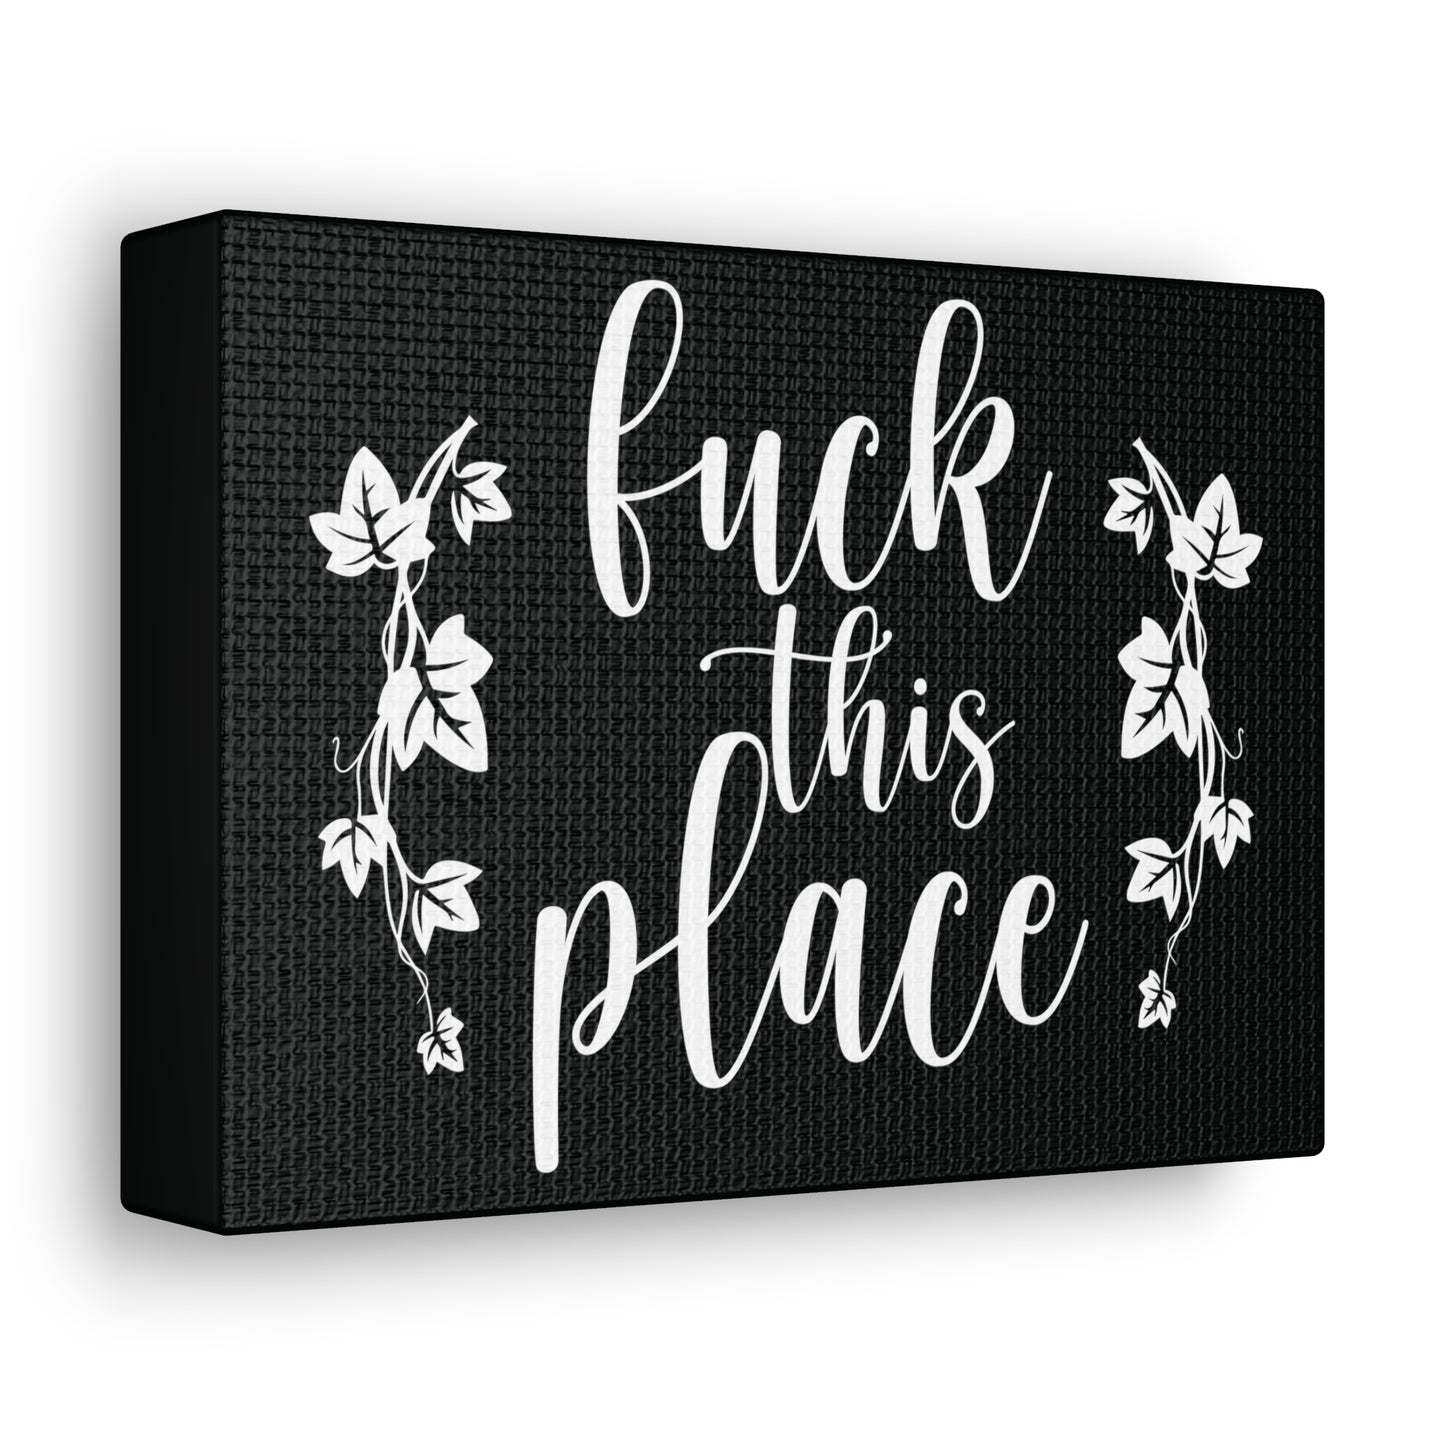 Fuck This Place -  Anti "Bless This House" Canvas (Black)